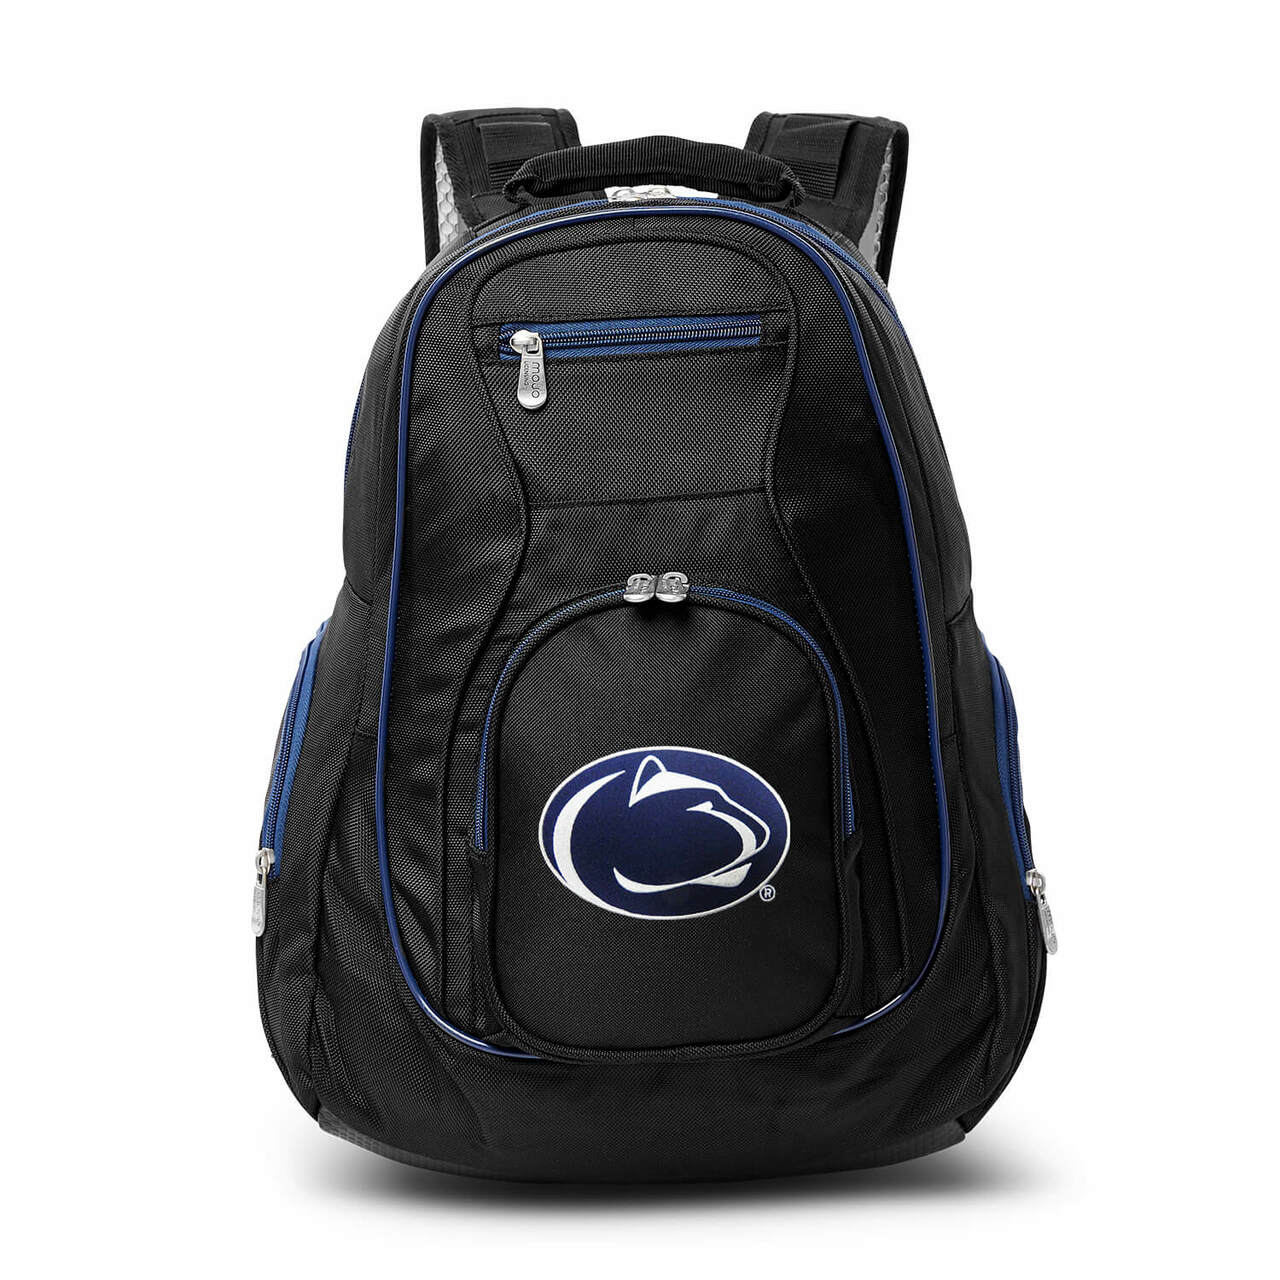 Nittany Lions Backpack | Penn State Nittany Lions Laptop Backpack